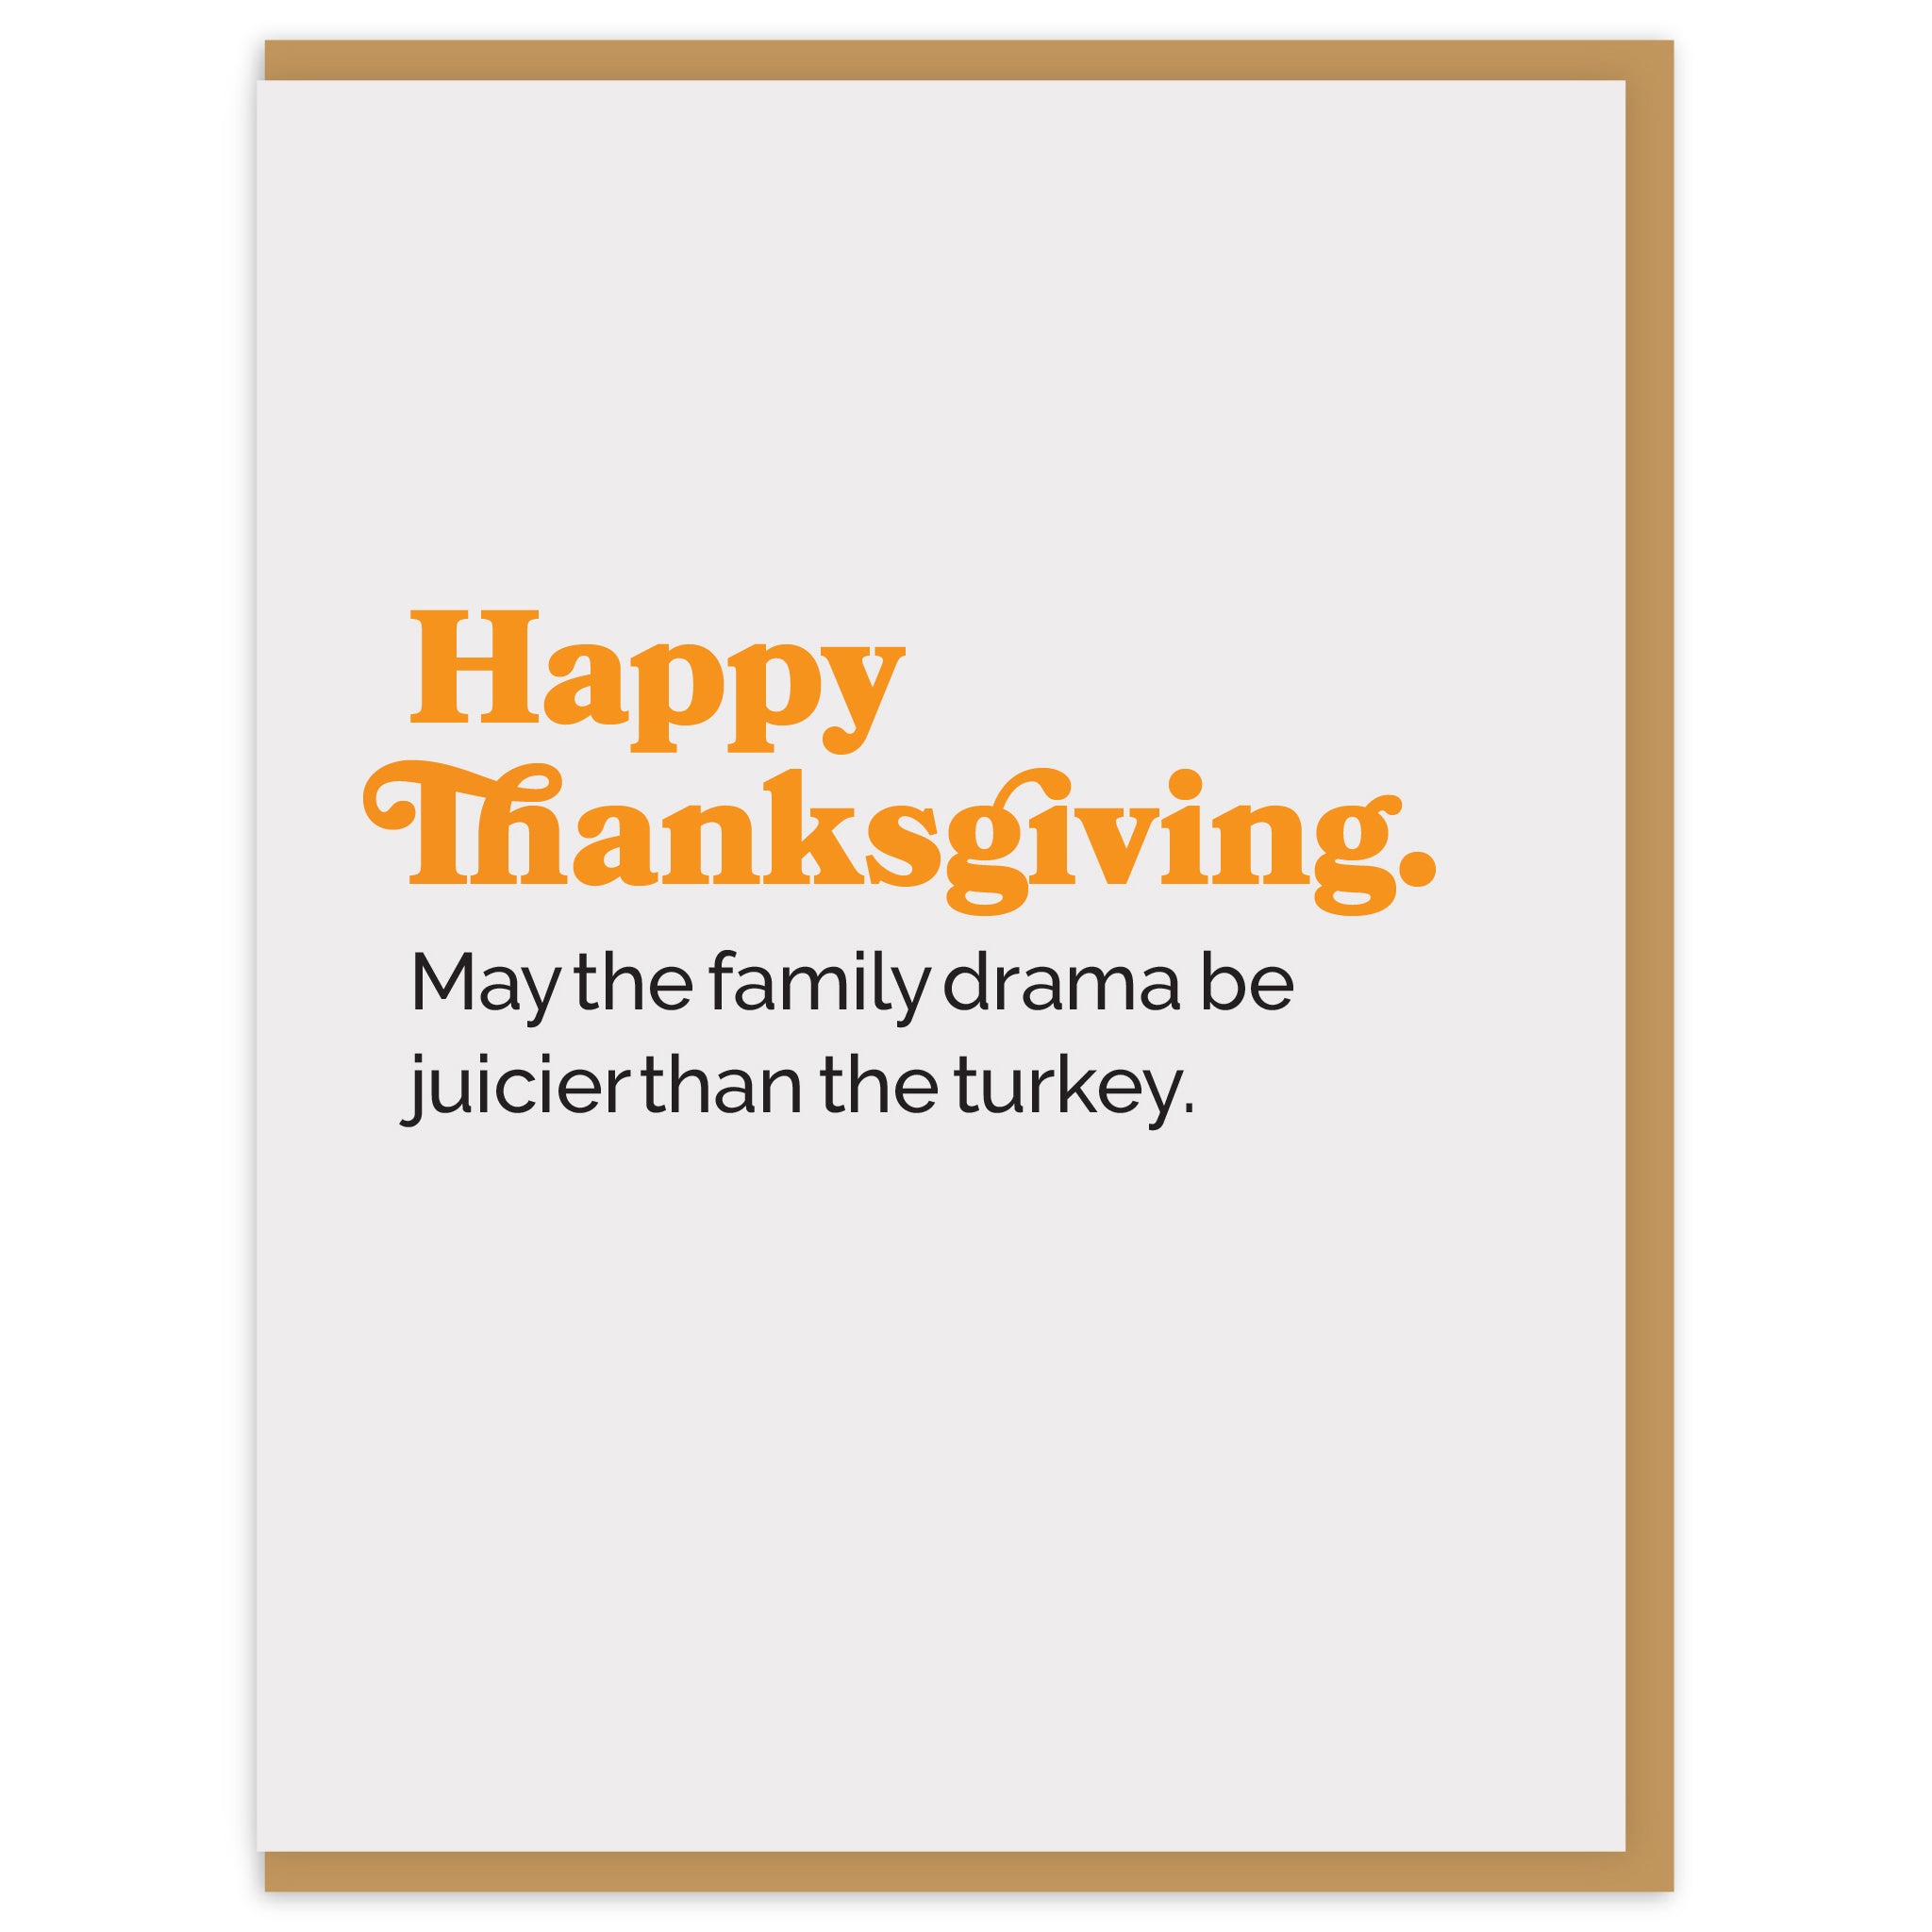 Happy Thanksgiving. May the family drama be juicier than the